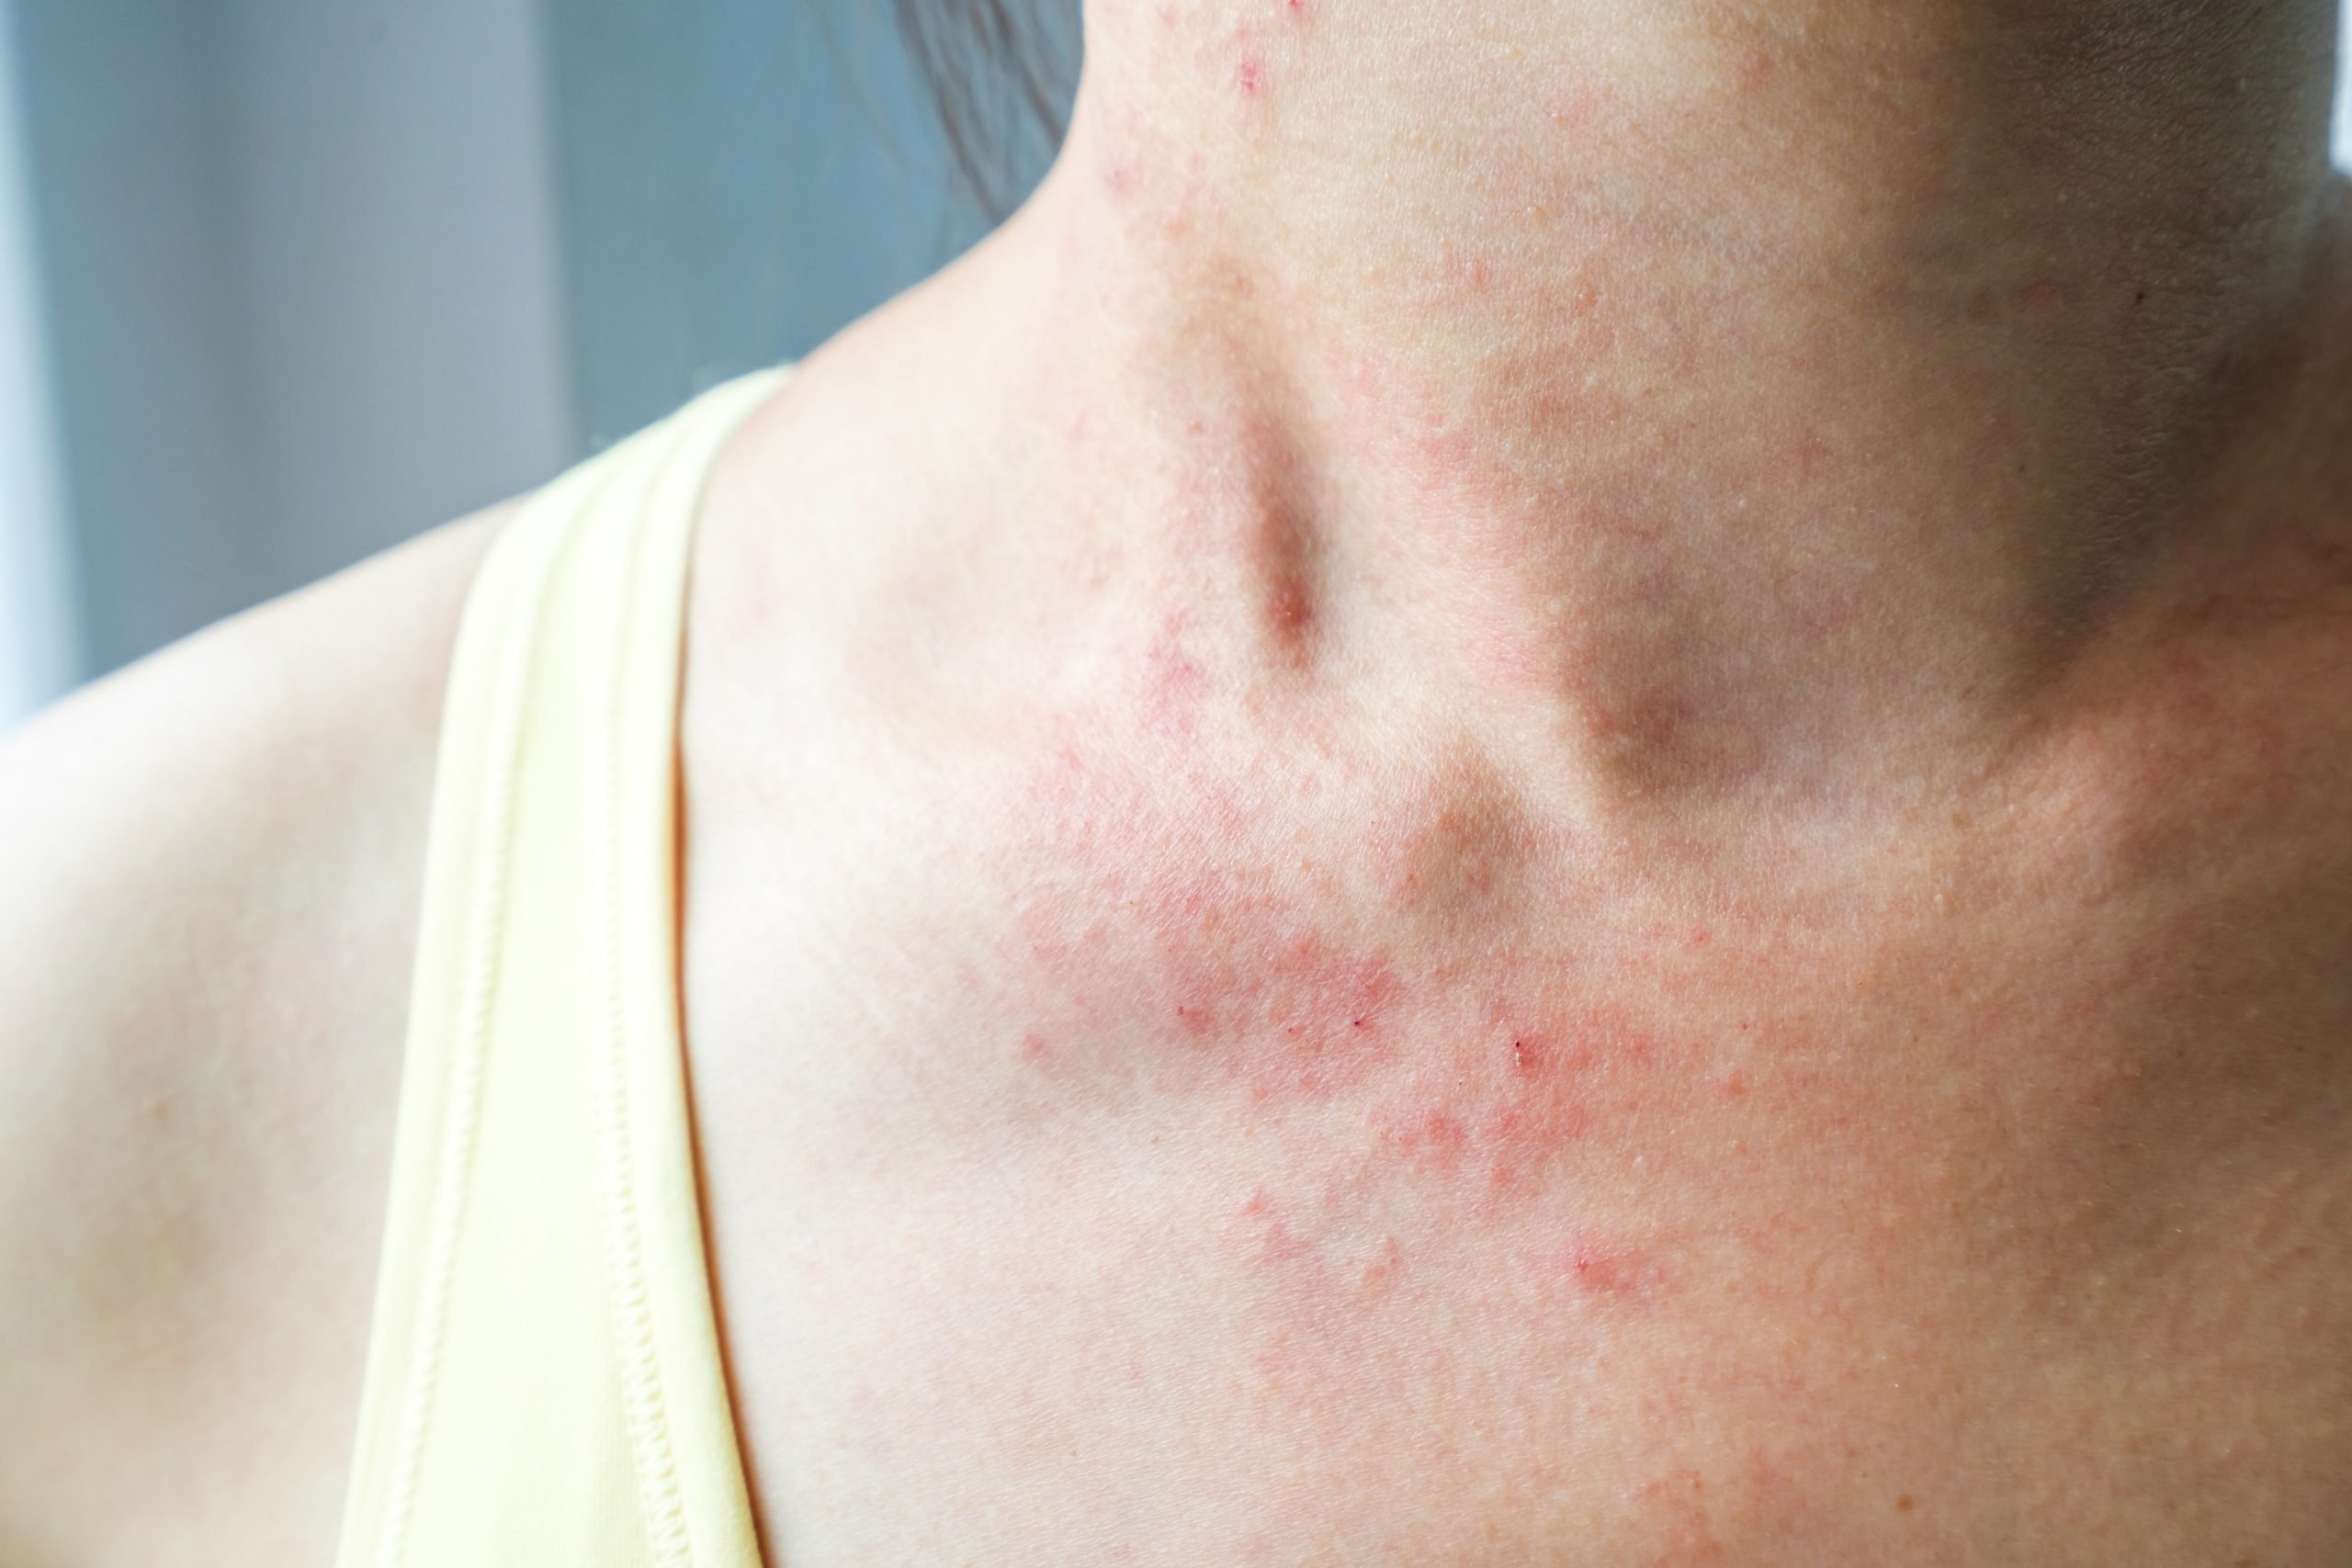 How tell if your rash is contact dermatitis, eczema ...